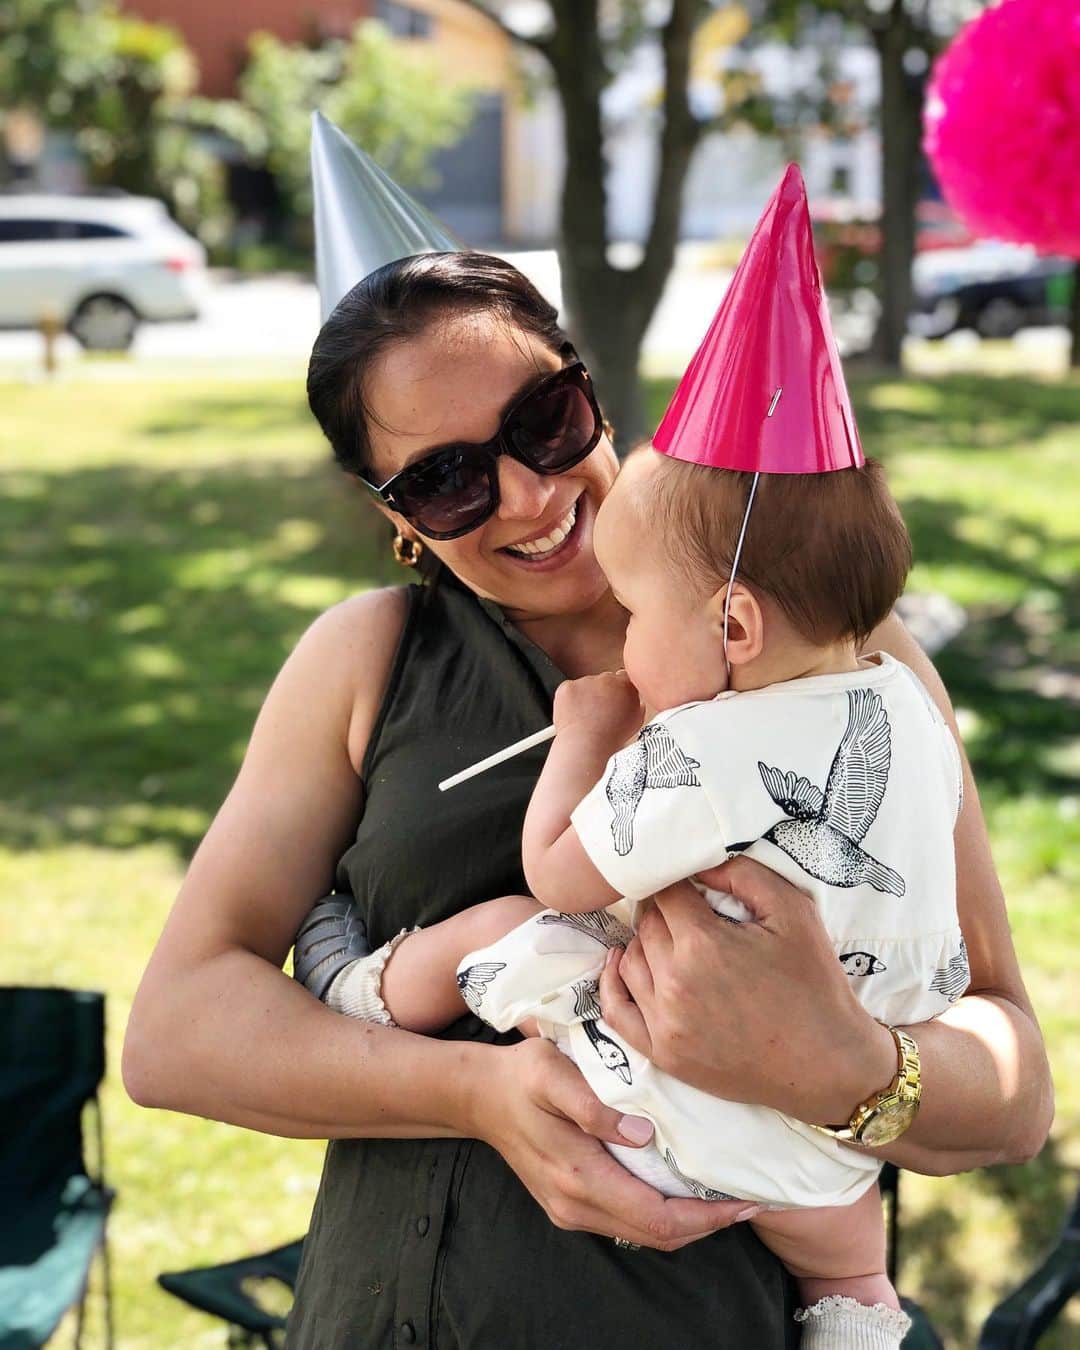 Sophie Pascoeのインスタグラム：「It’s my favourite little person’s 1st birthday today❣️You bring such joy and happiness to this world, especially with your infectious smile and giggles. We all love you very much G! 💖 #niece #family #birthdaygirl #1stbirthday #party」